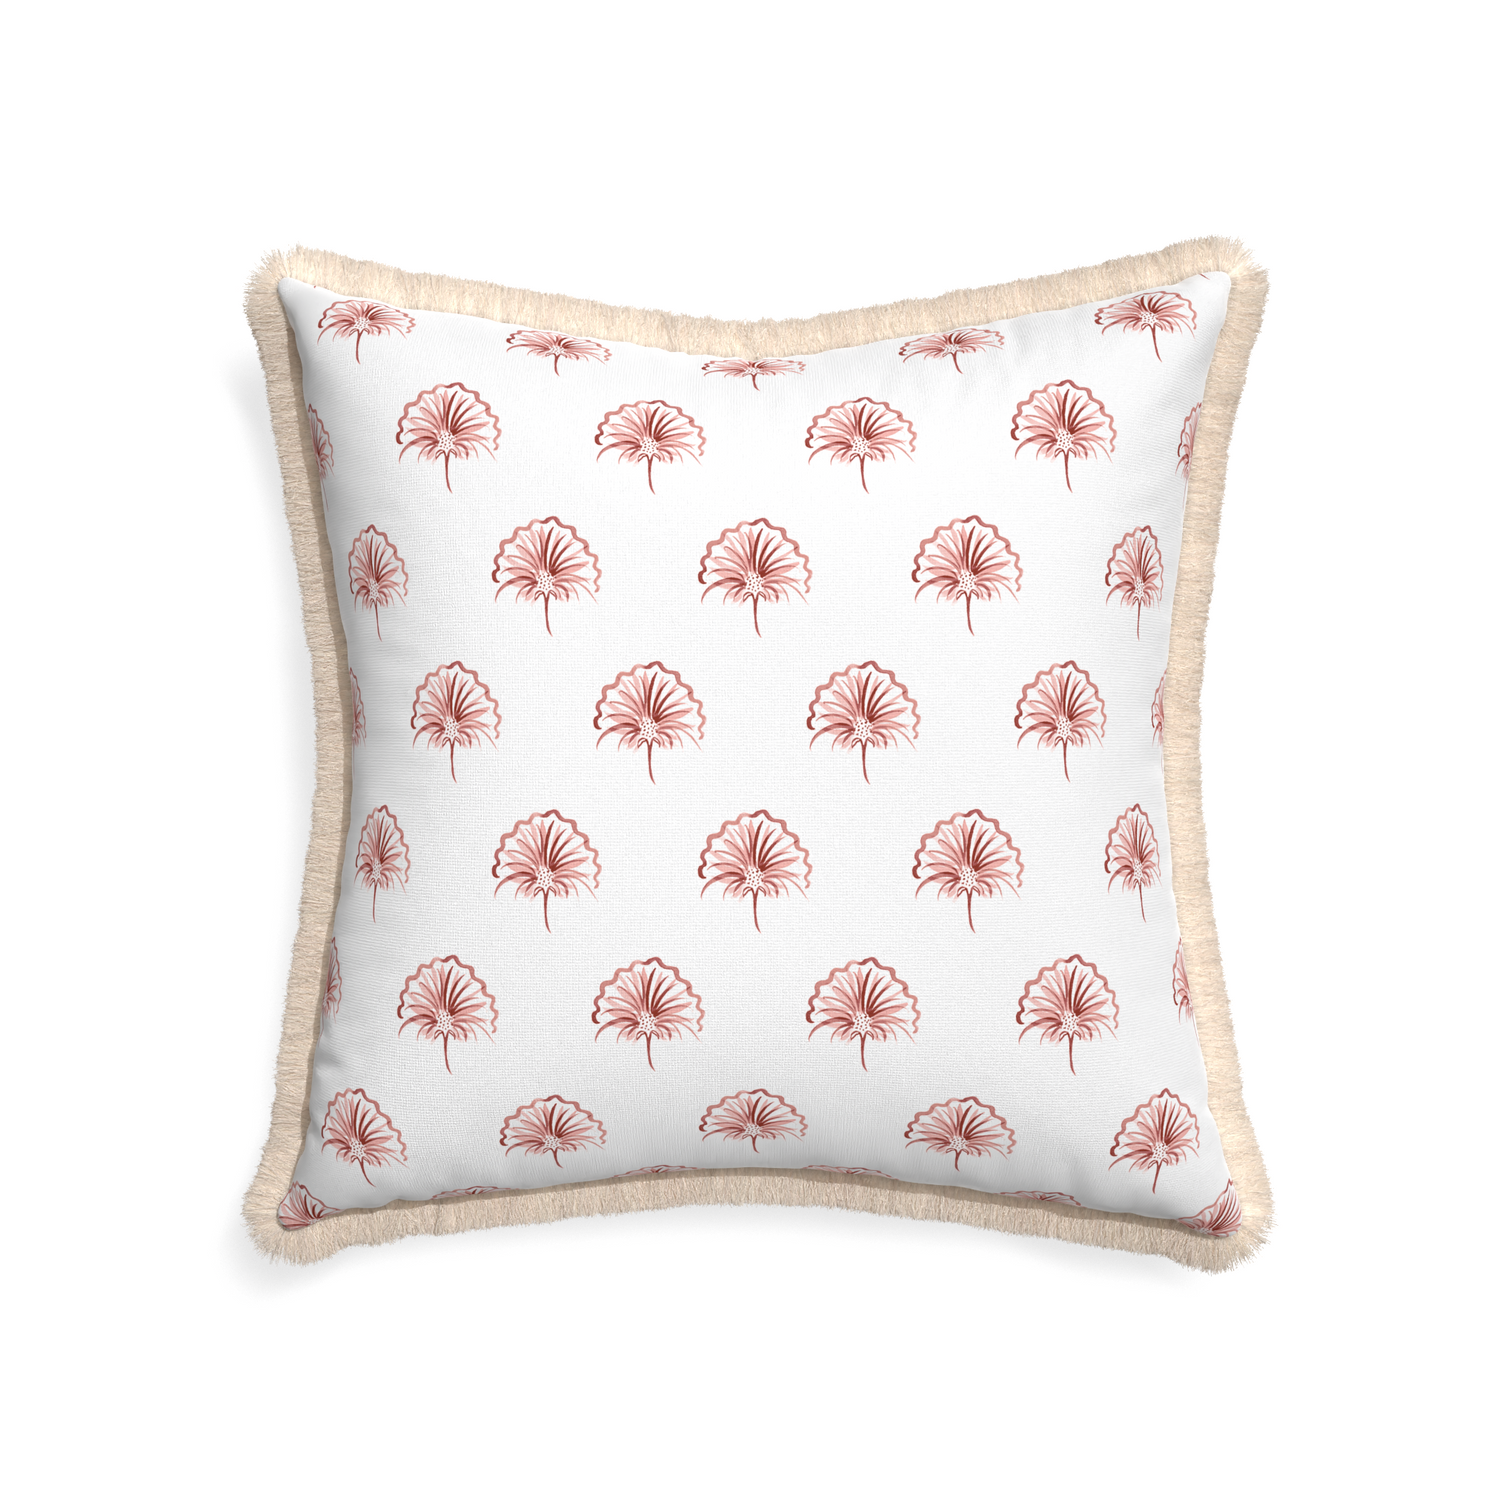 22-square penelope rose custom floral pinkpillow with cream fringe on white background